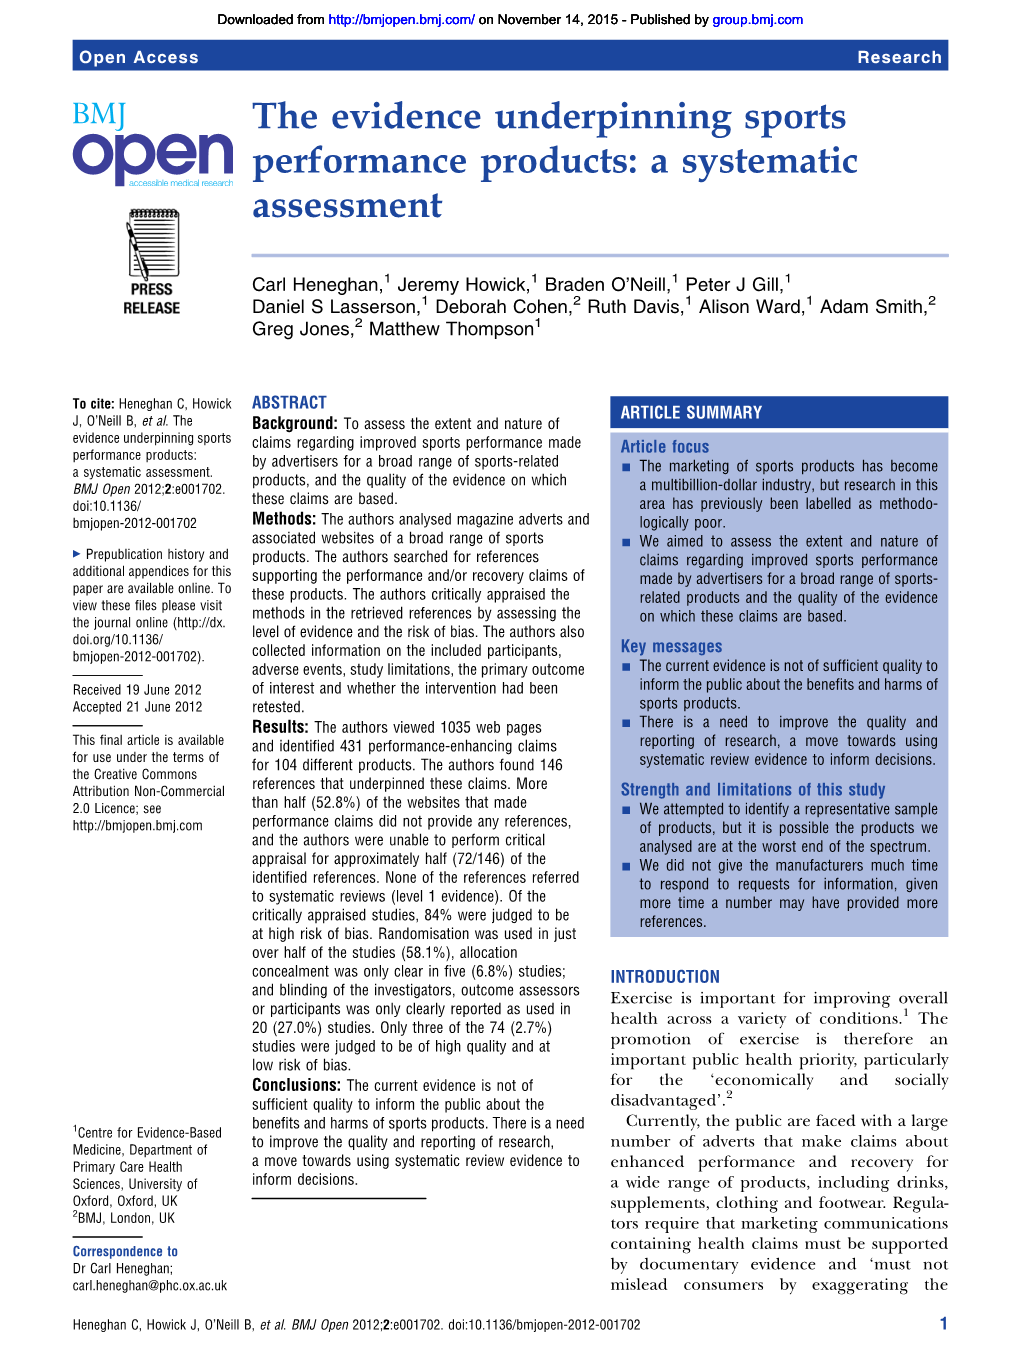 The Evidence Underpinning Sports Performance Products: a Systematic Assessment